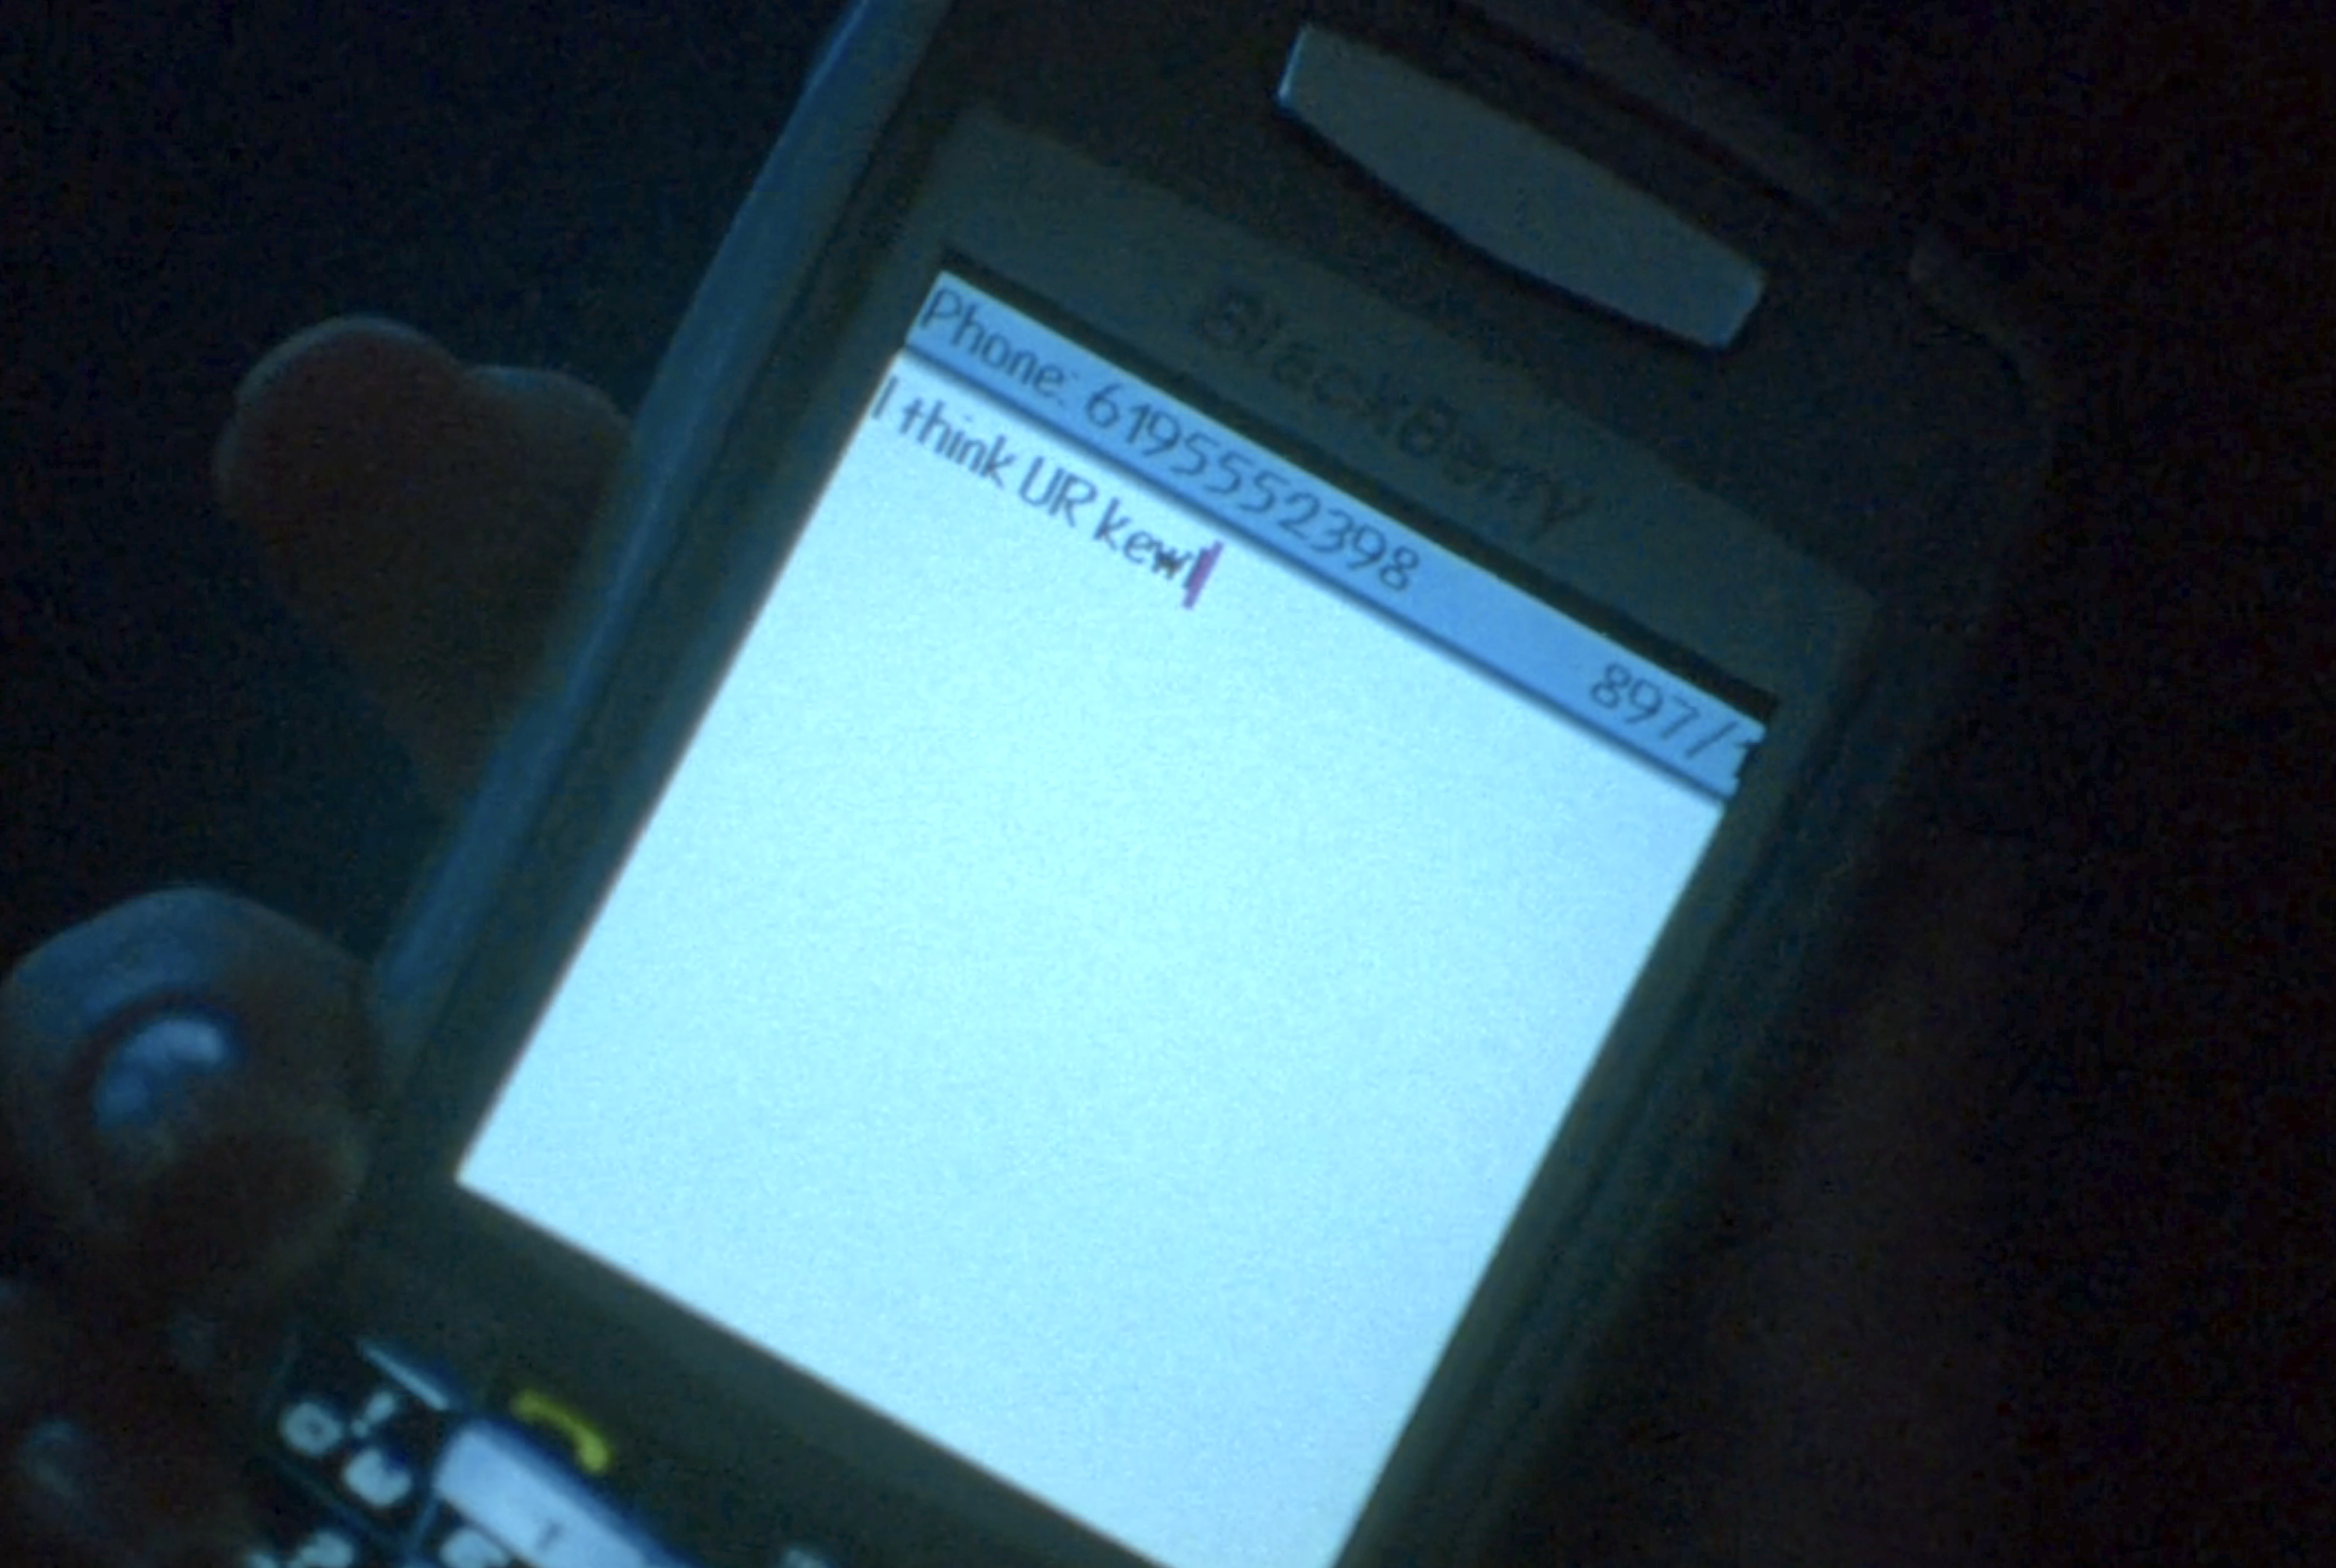 Screenshot from Veronica Mars S1E15. A Blackberry screen with a text mesage that reads "I think UR kewl."